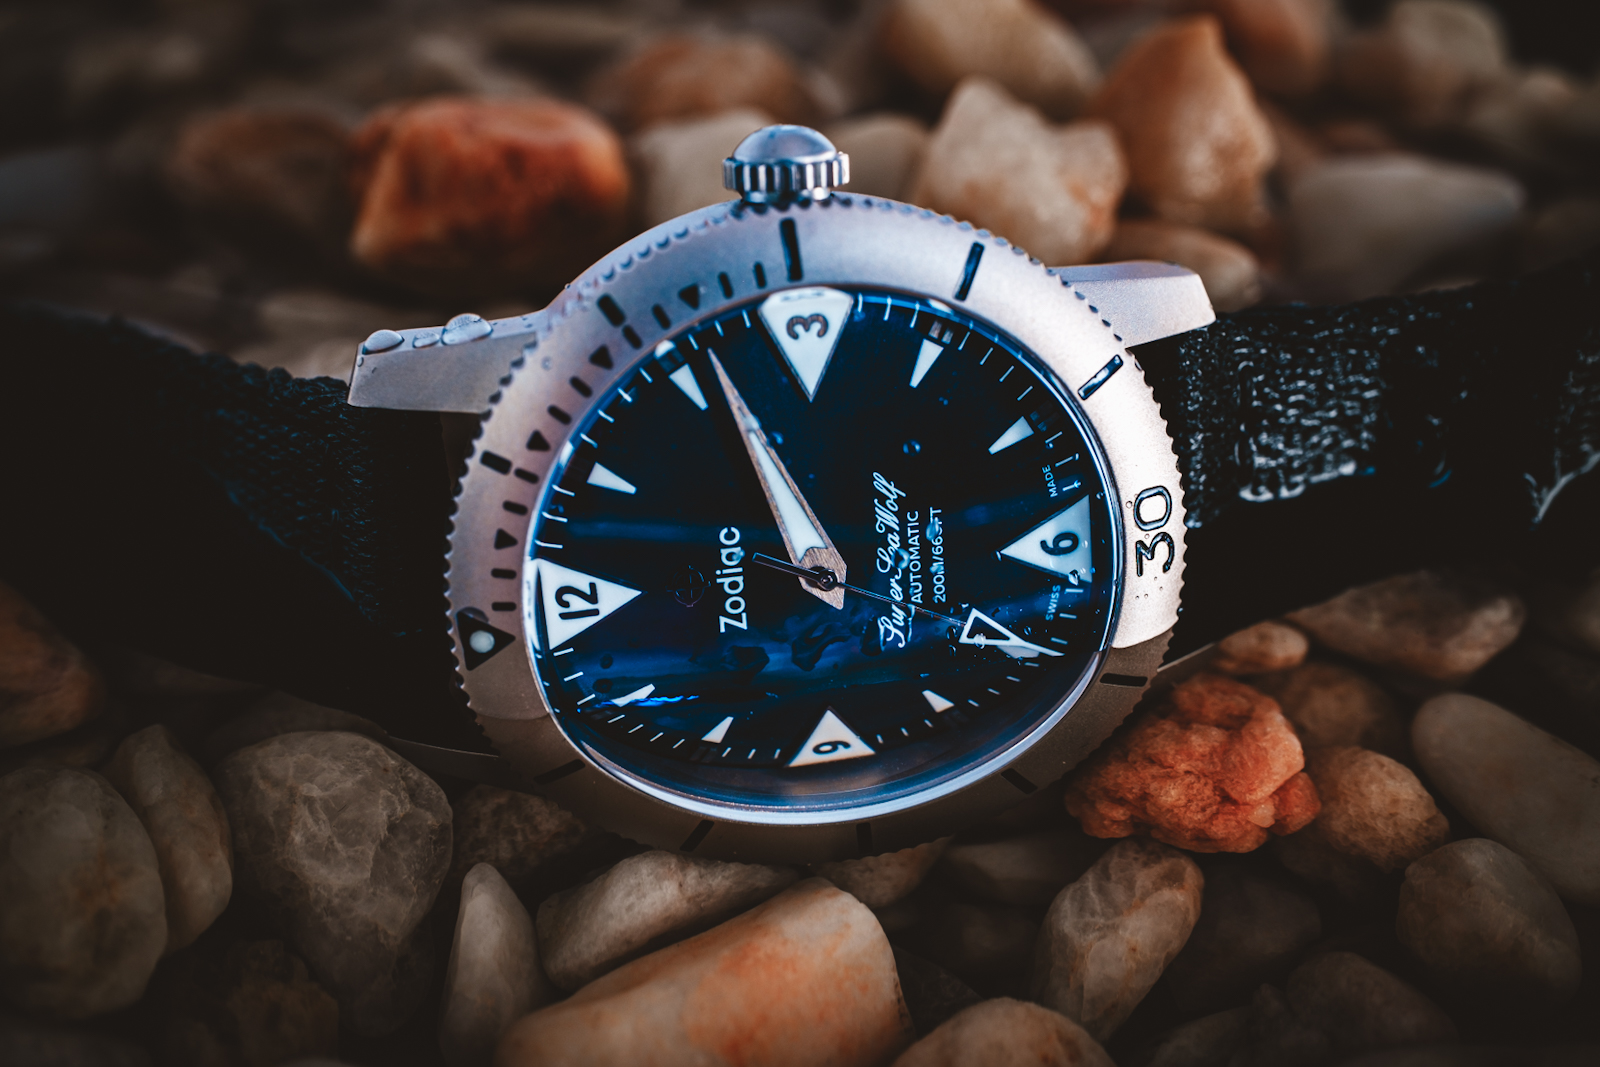 Timeless Titanium: Huckberry x Zodiac Team up to Release Iconic Super Sea Wolf Dive Watch